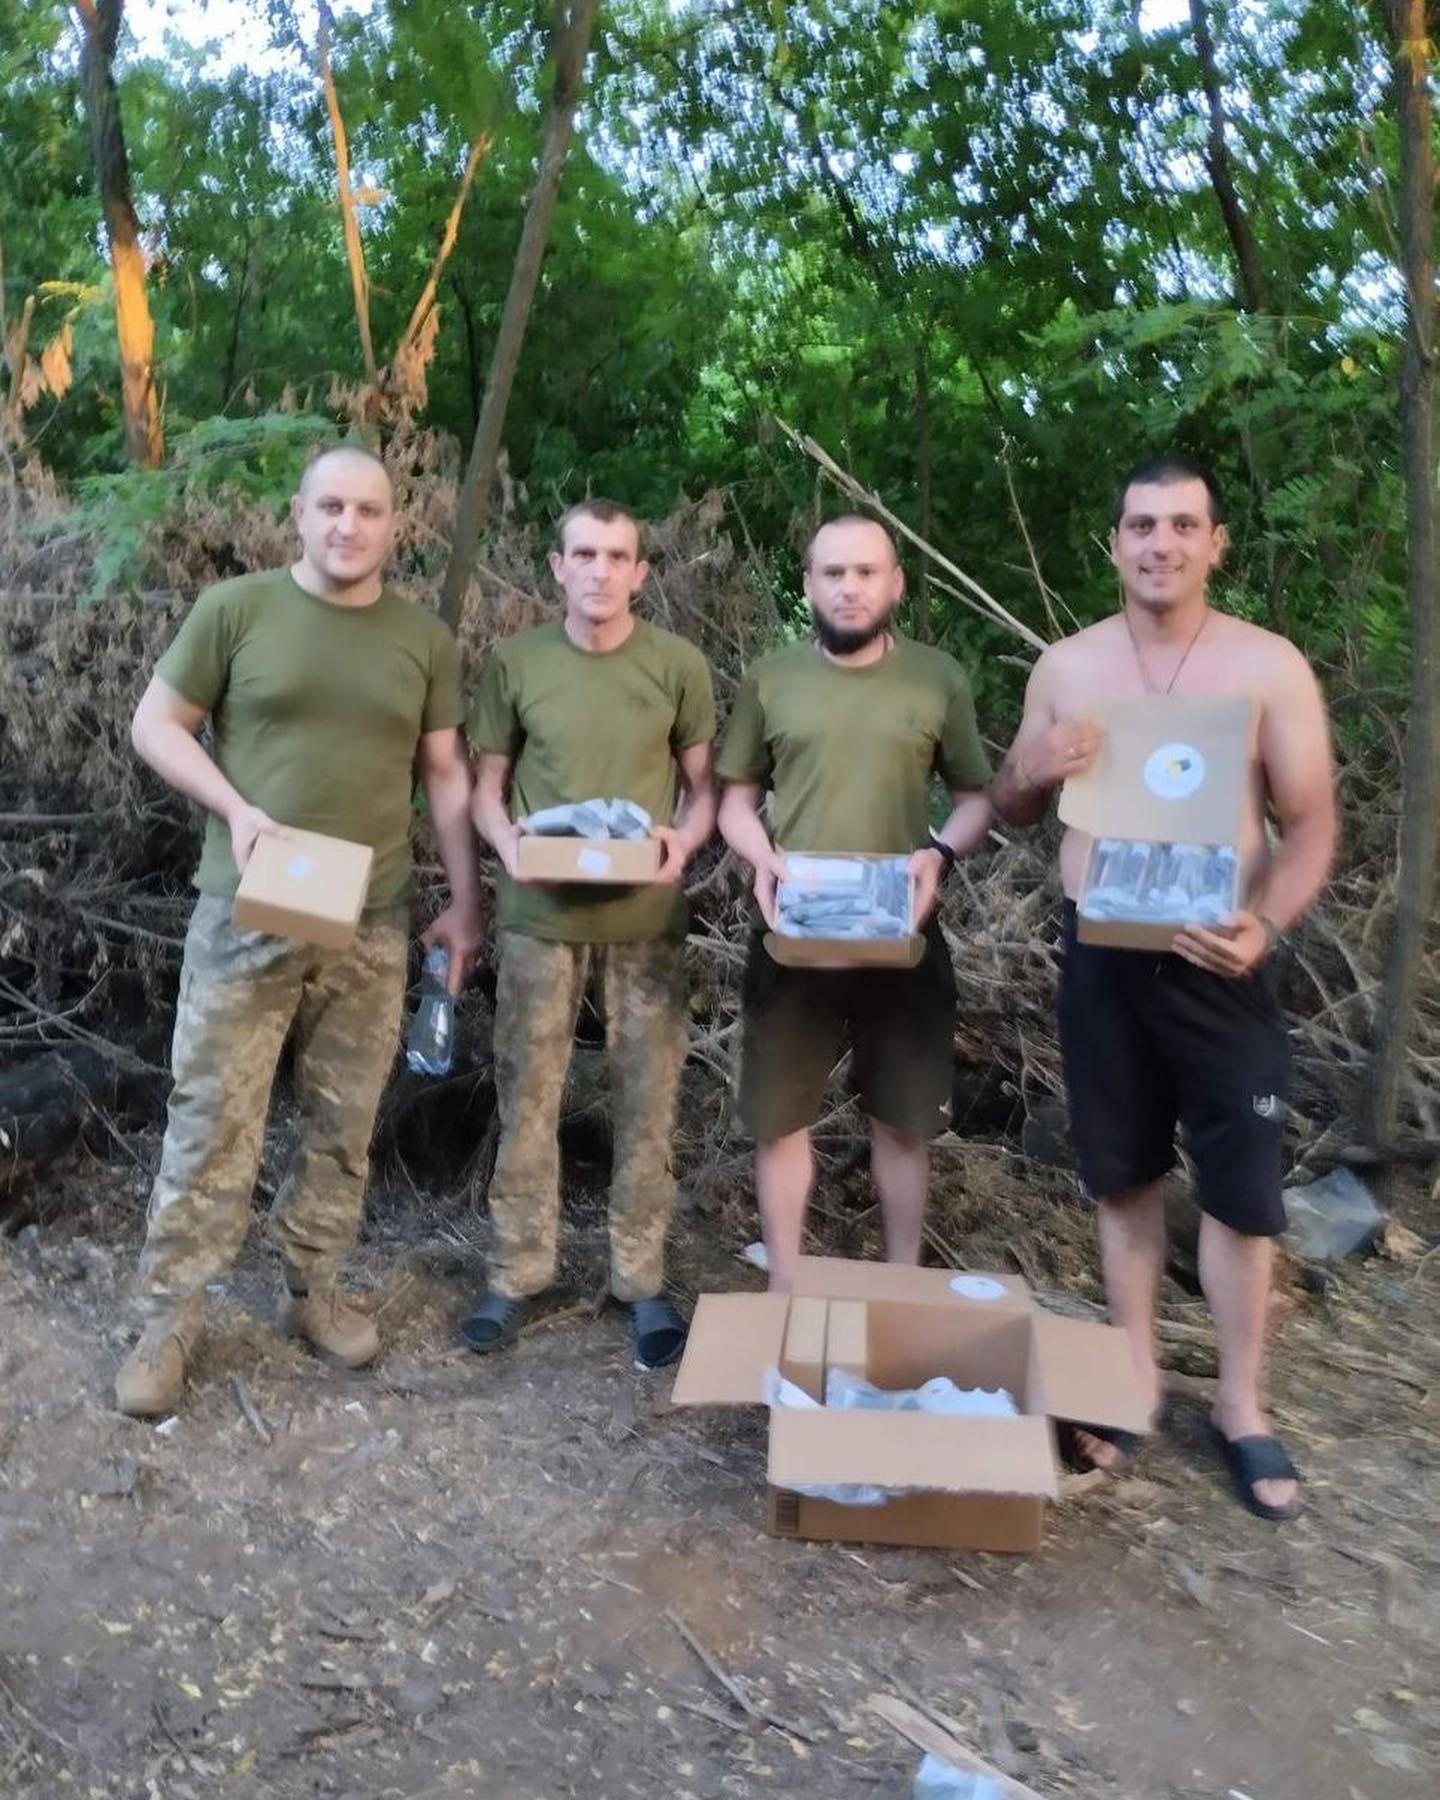 a group of men standing in a wooded area holding boxes.